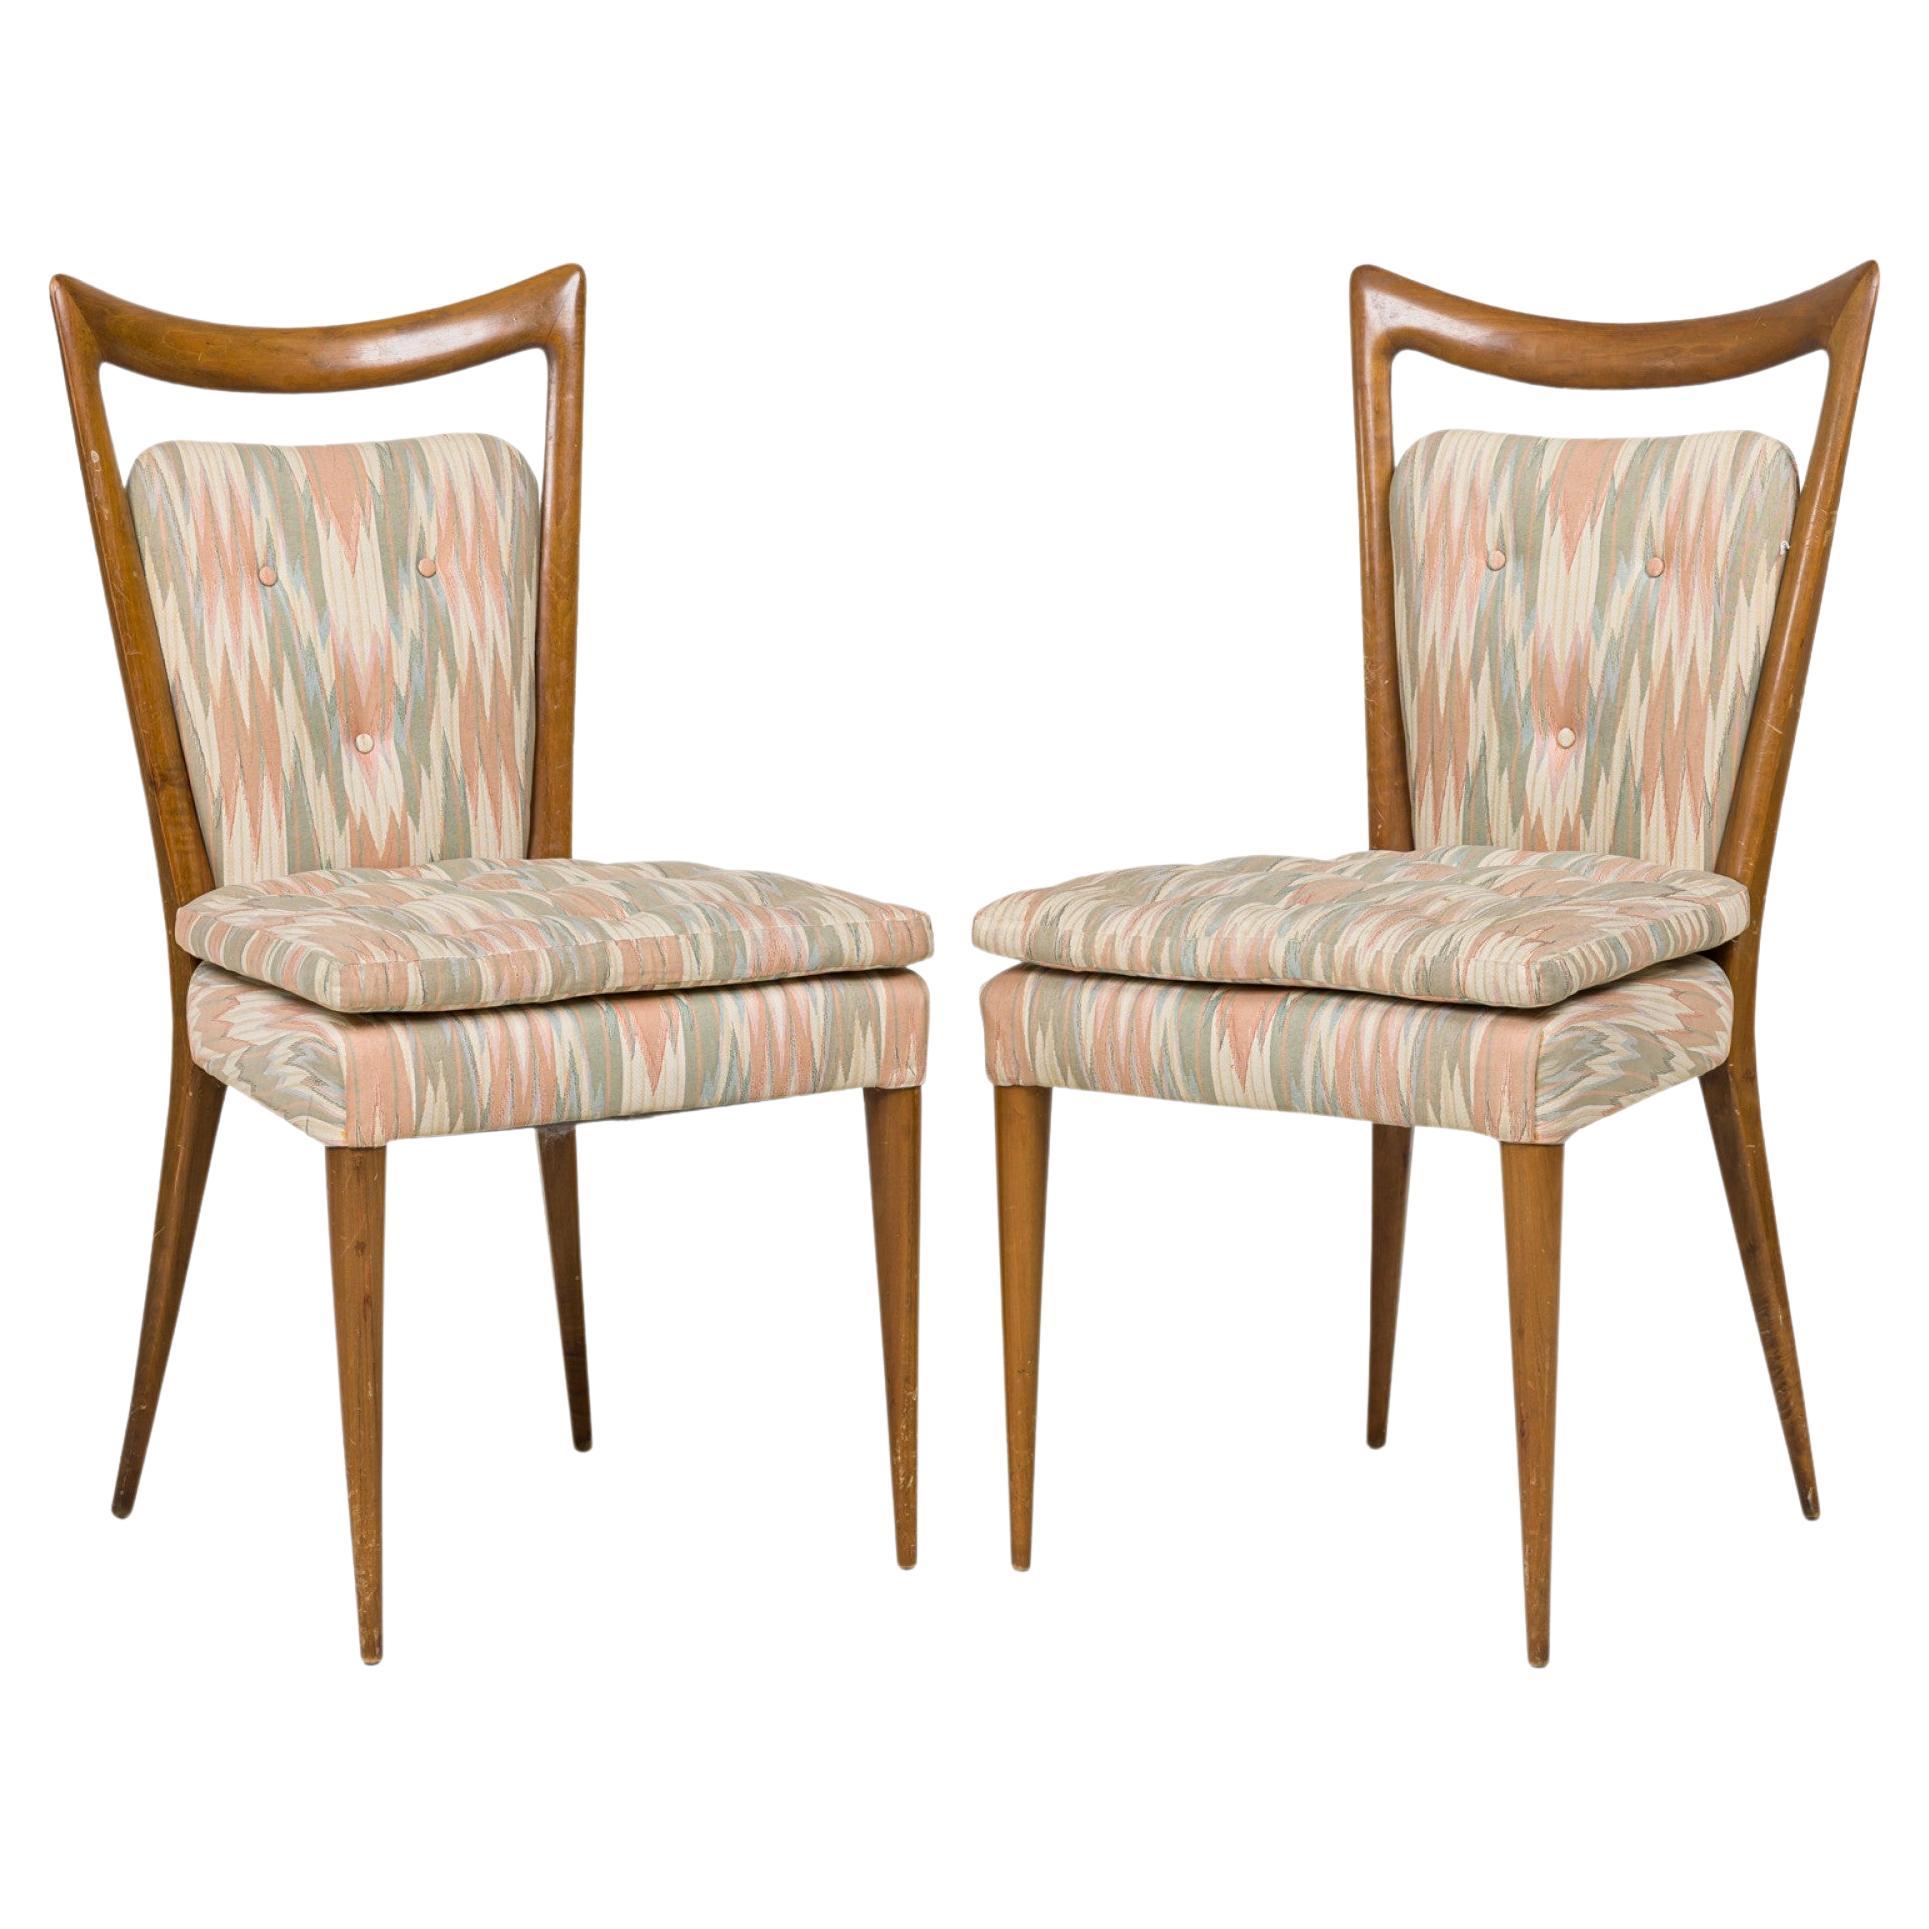 Set of 6 Melchiorre Bega Midcentury Italian Zigzag Upholstered Dining Chairs For Sale